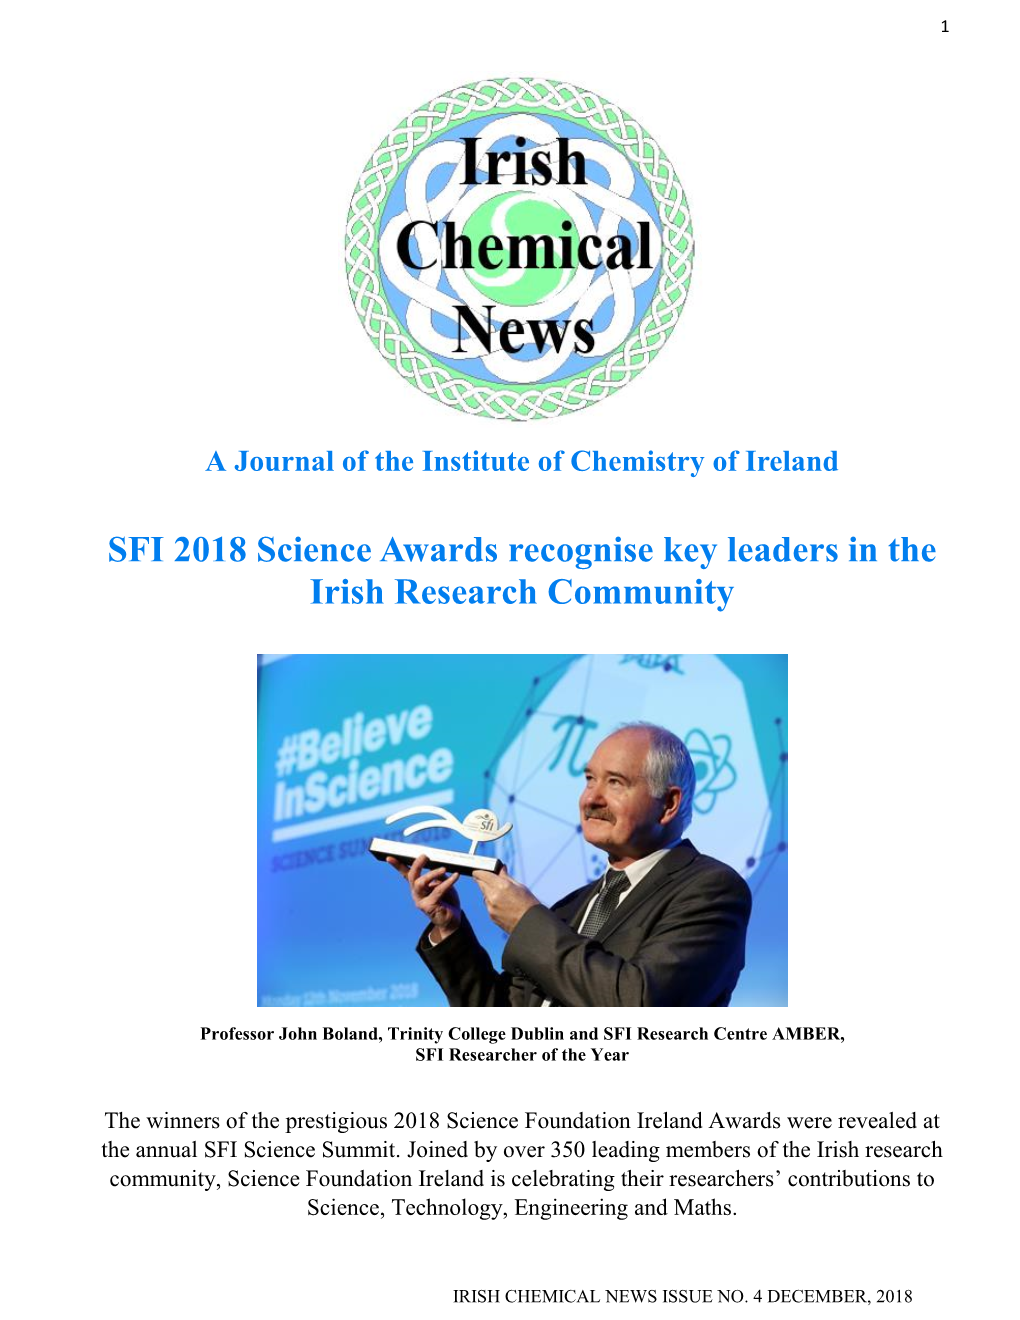 SFI 2018 Science Awards Recognise Key Leaders in the Irish Research Community